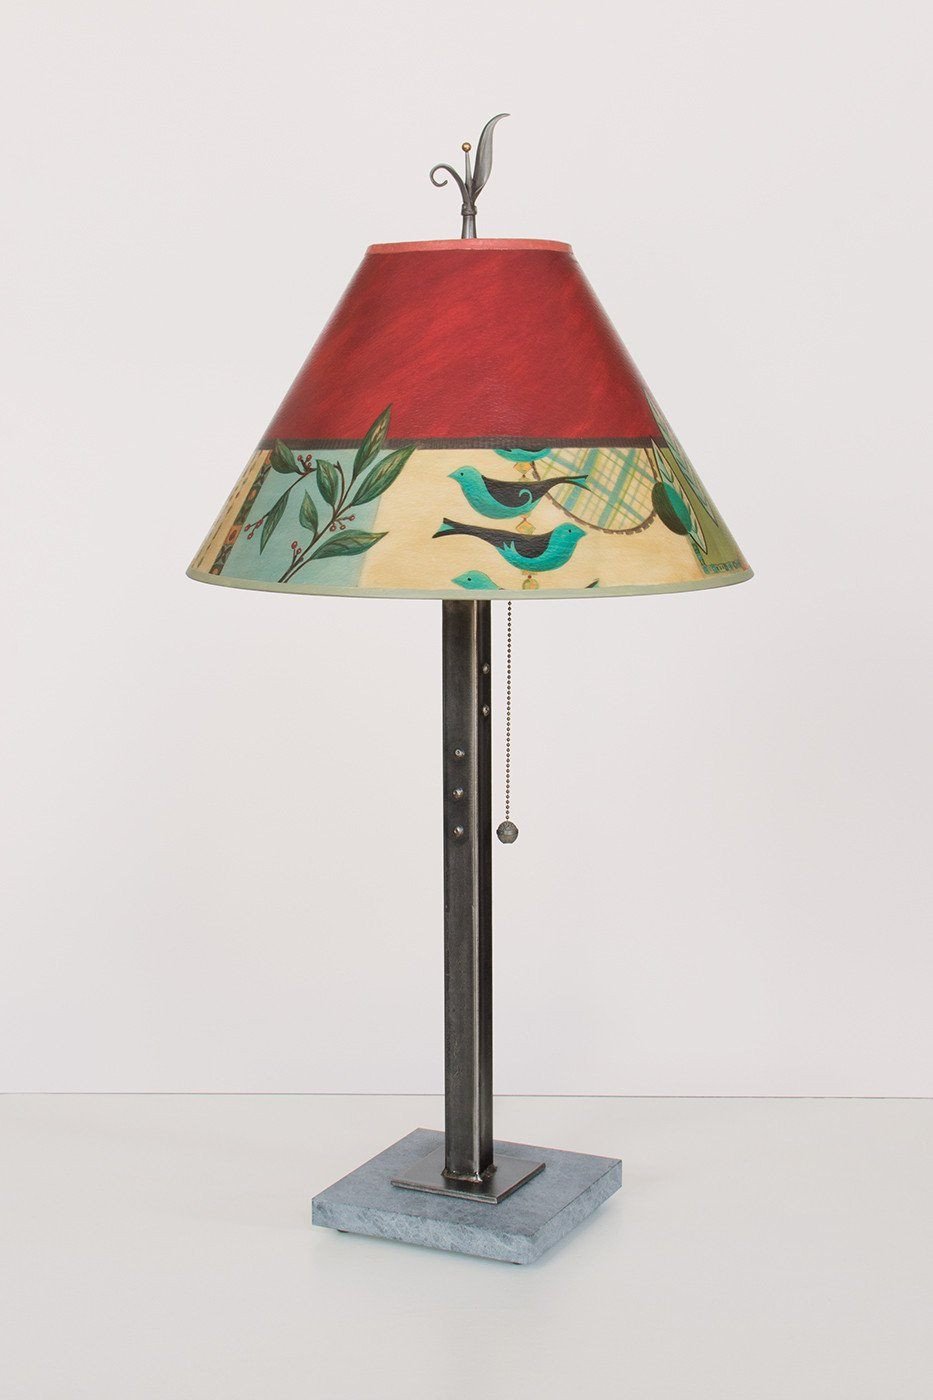 Steel Table Lamp on Marble with Medium Conical Shade in New Capri Lit